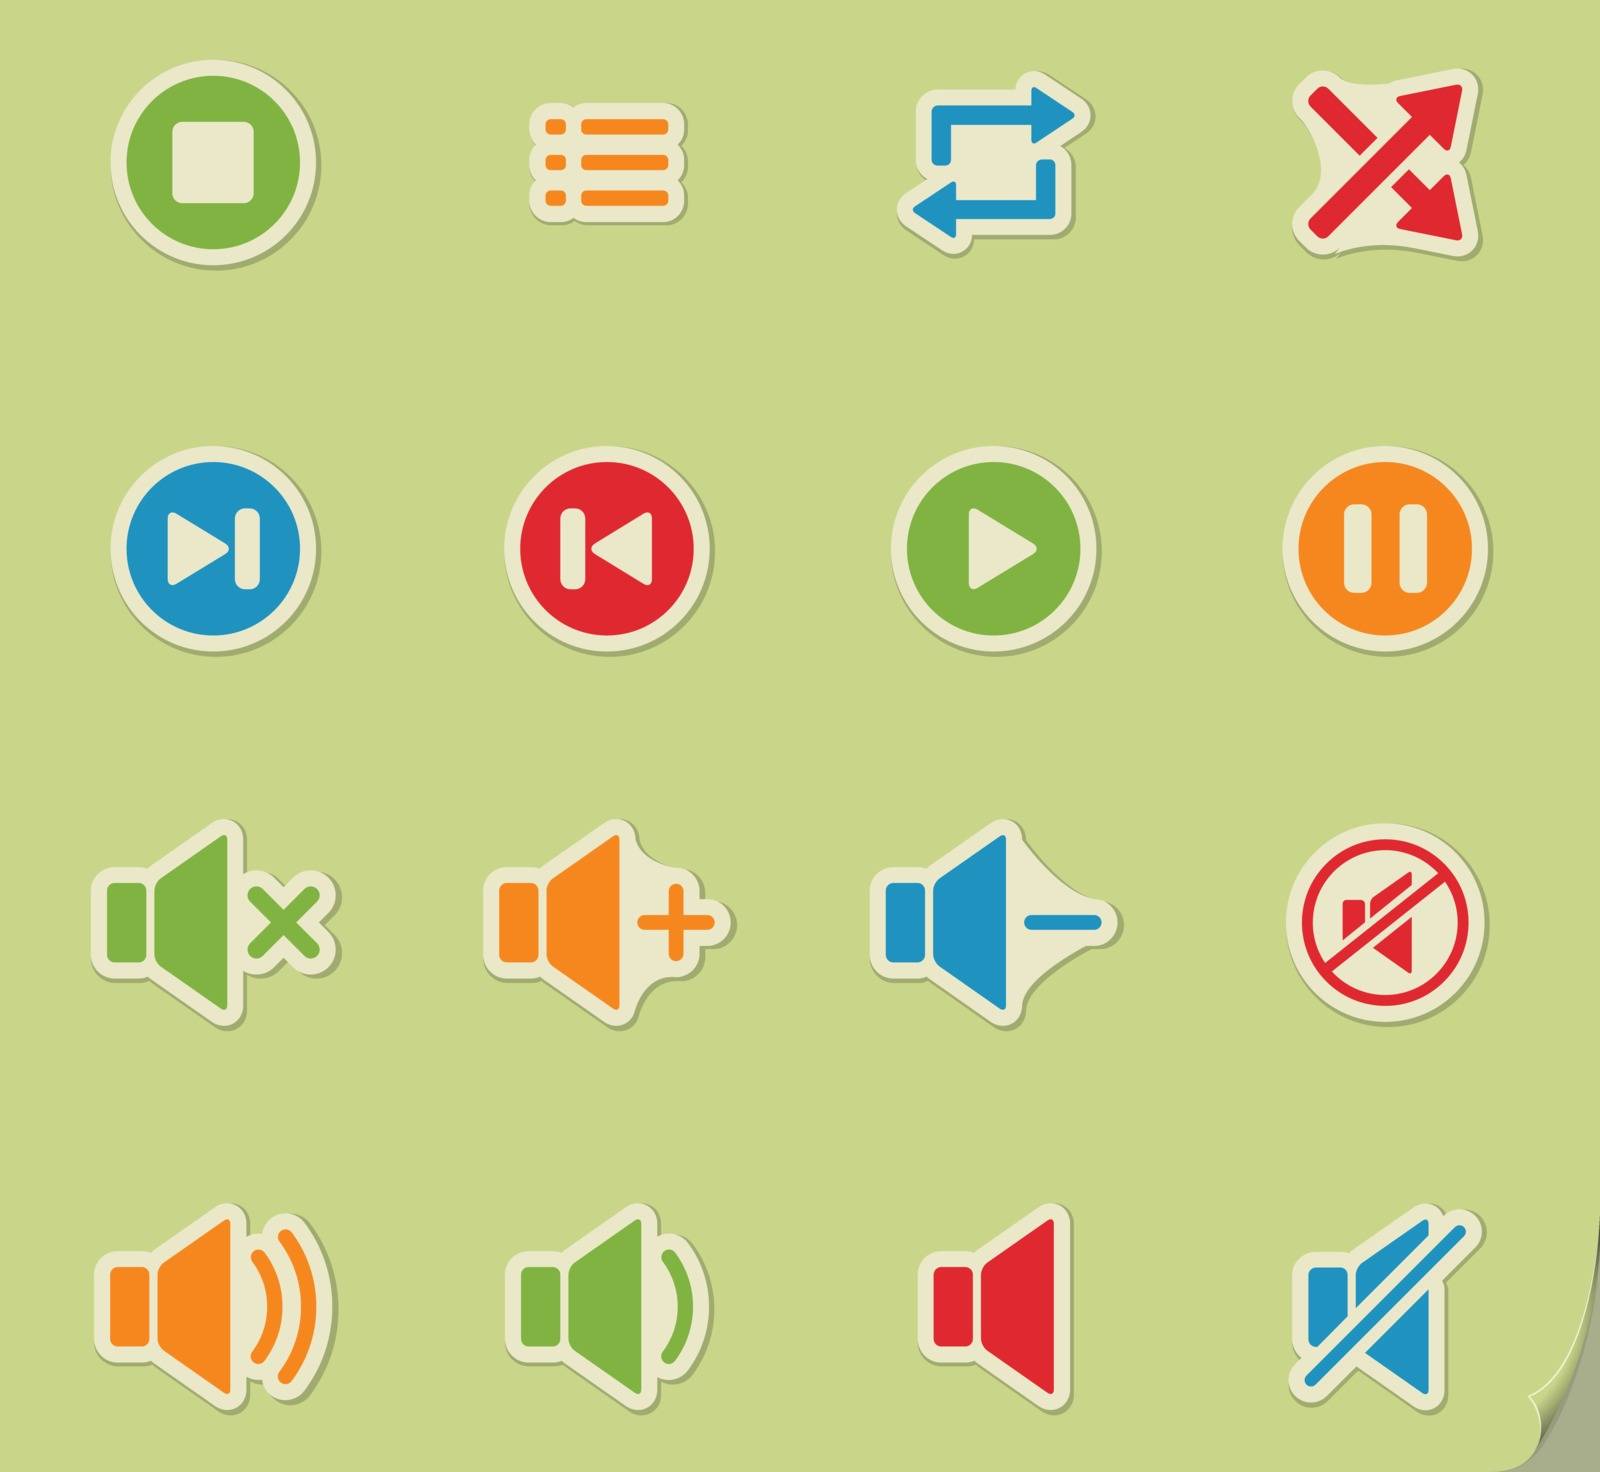 Media player simply symbol for web icons and user interface